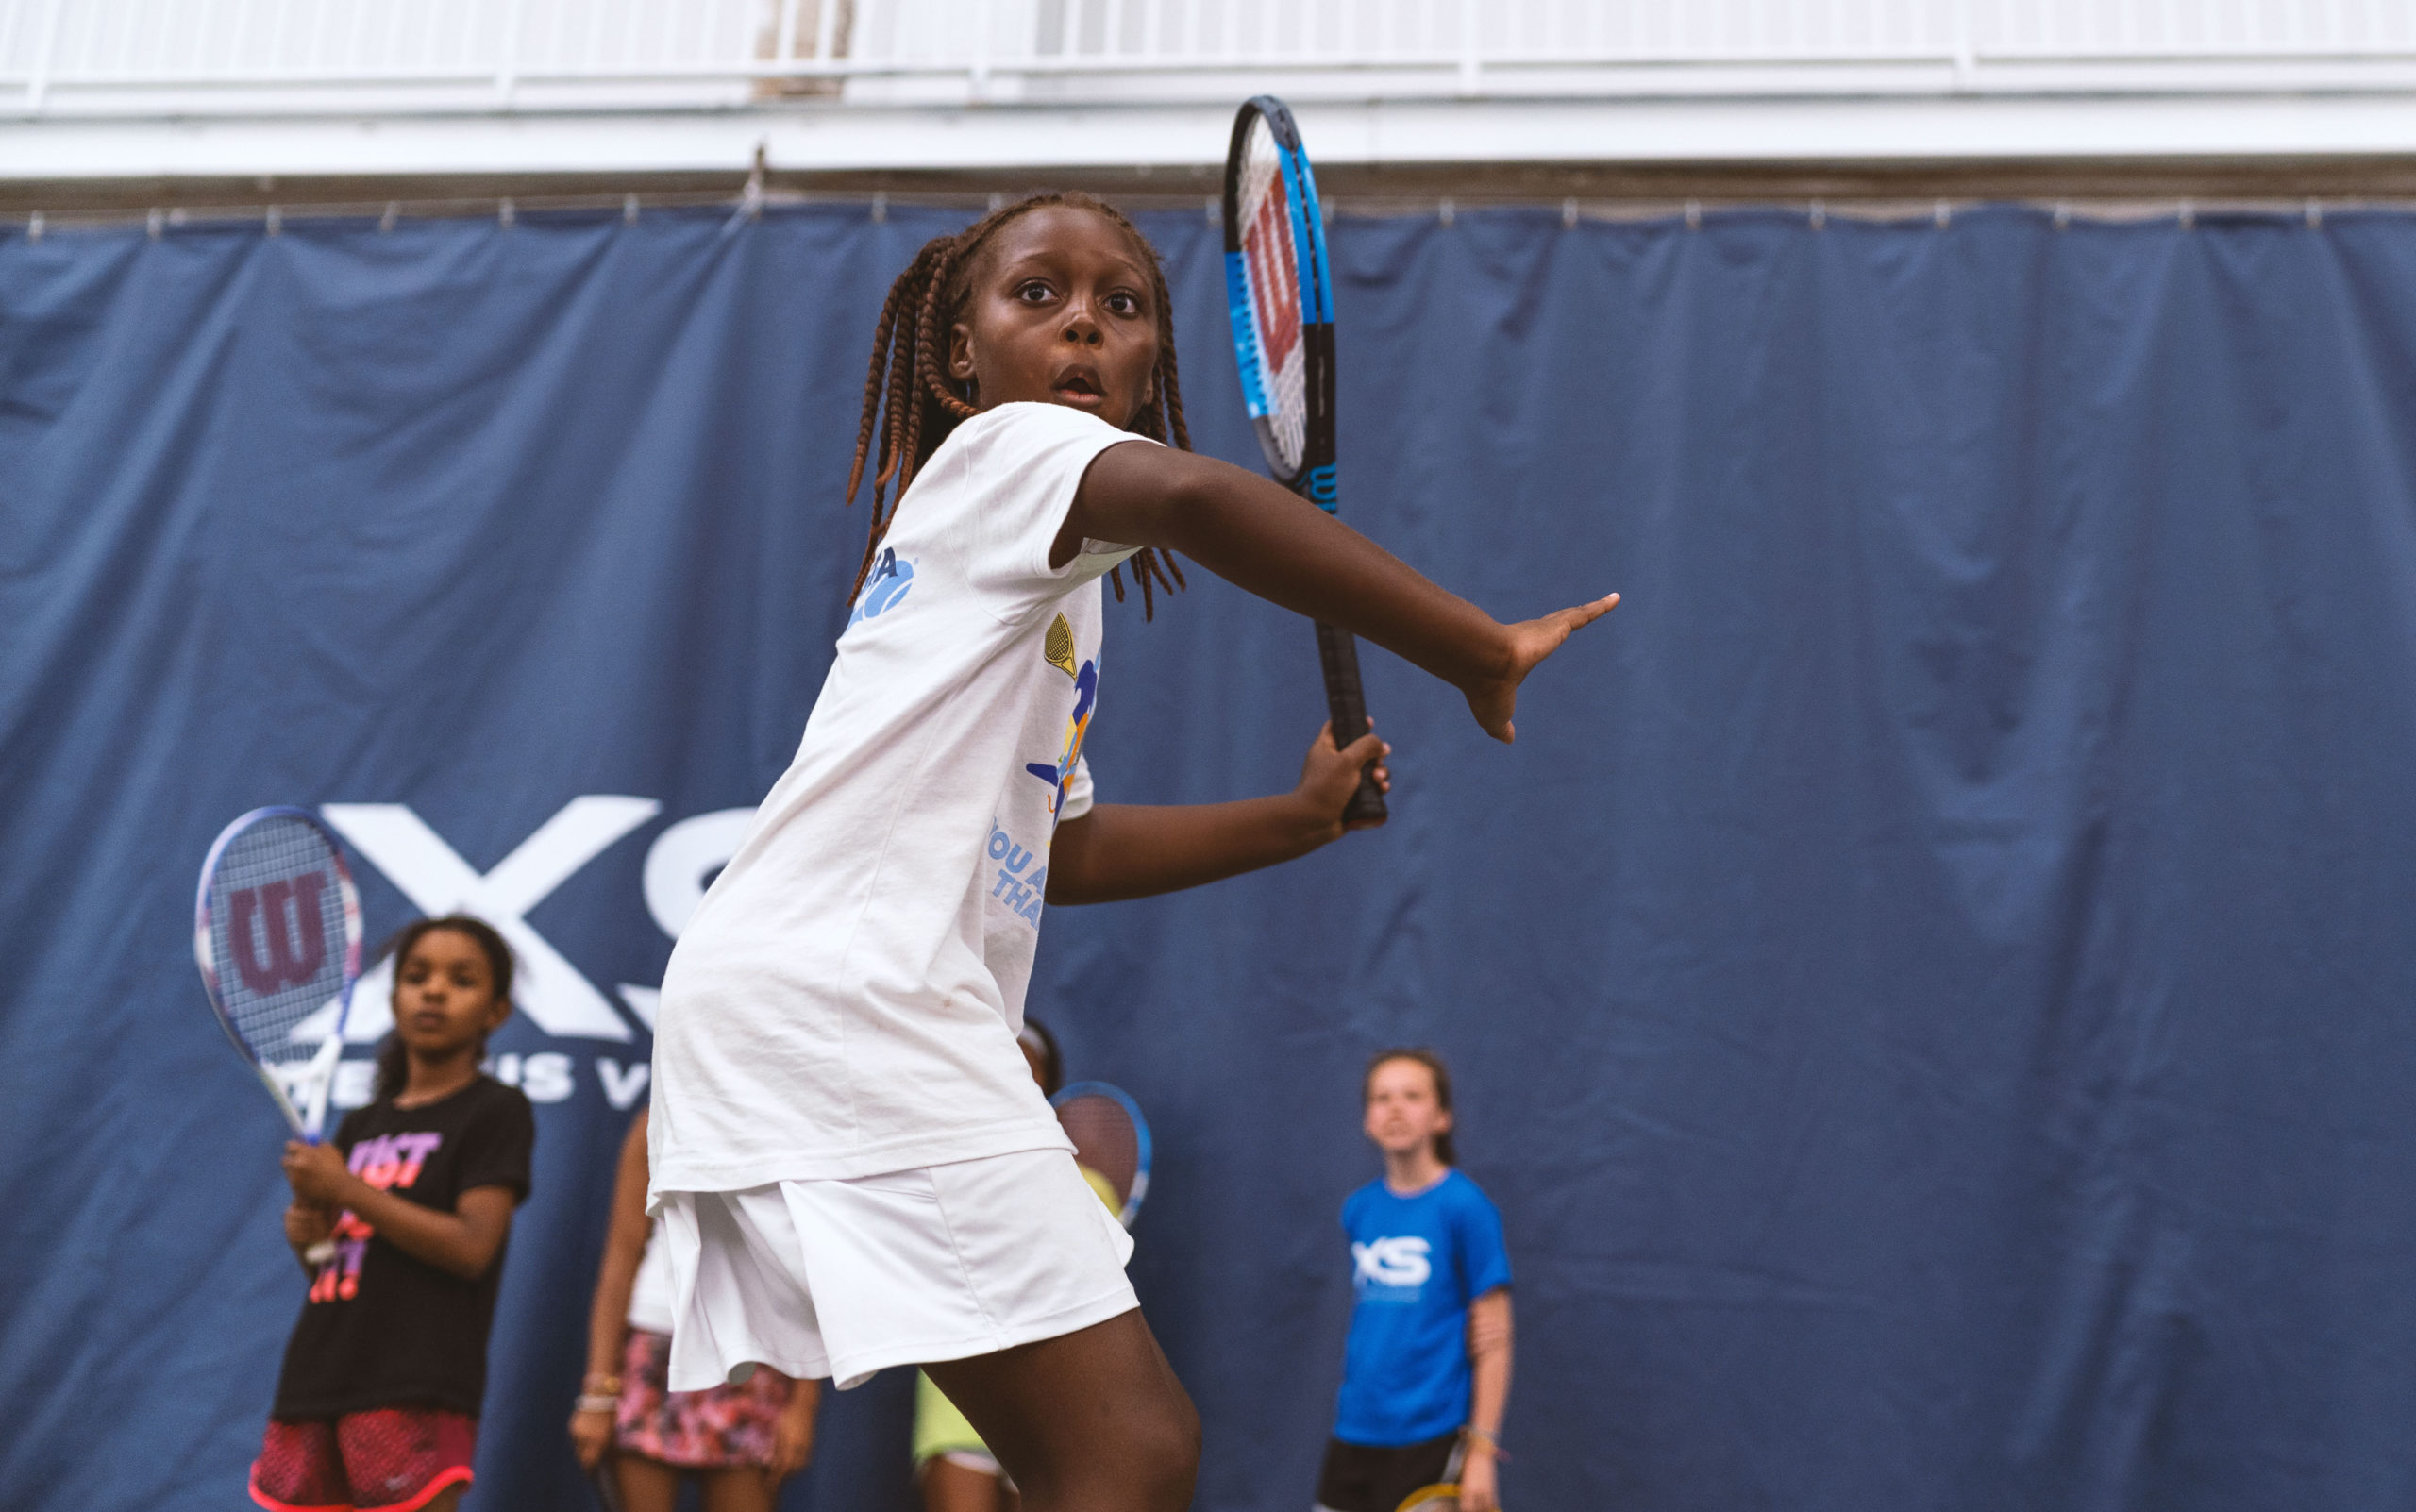 New National Report Sheds Light on Girls' Sports Participation - Women's  Sports Foundation